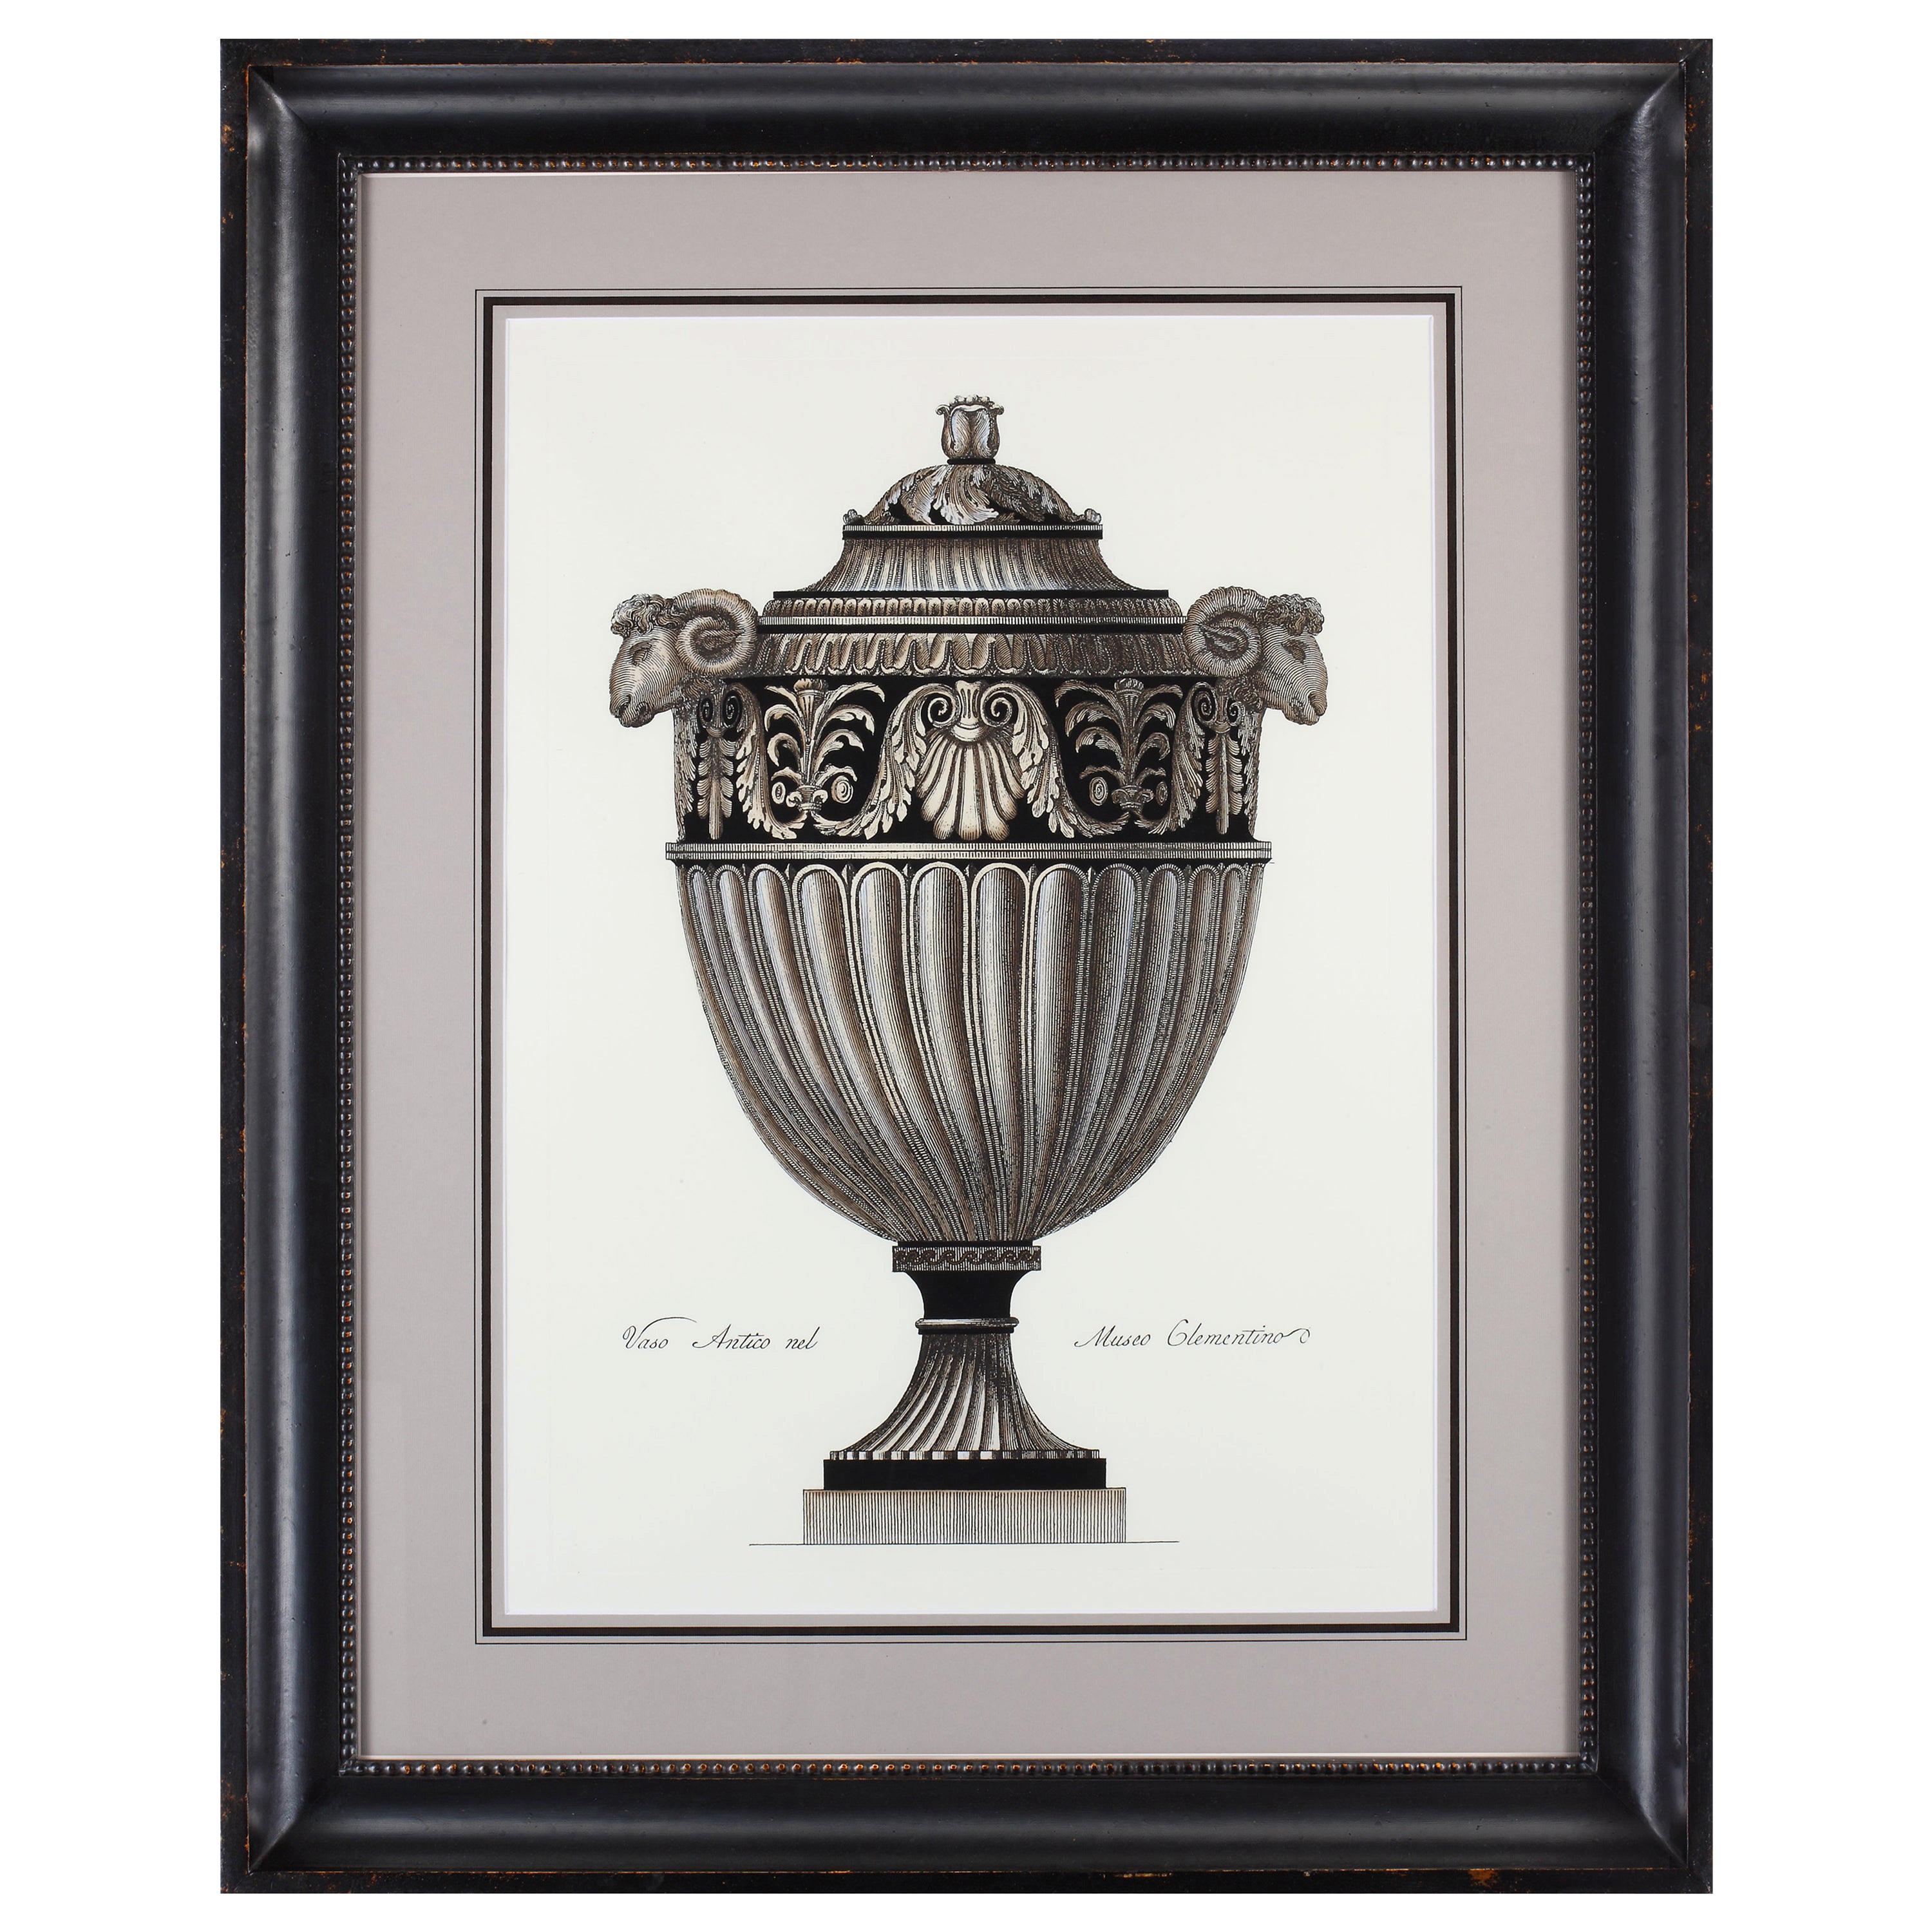 Contemporary Italian Hand Colored Roman Vase Print with Handcrafted Black Frame